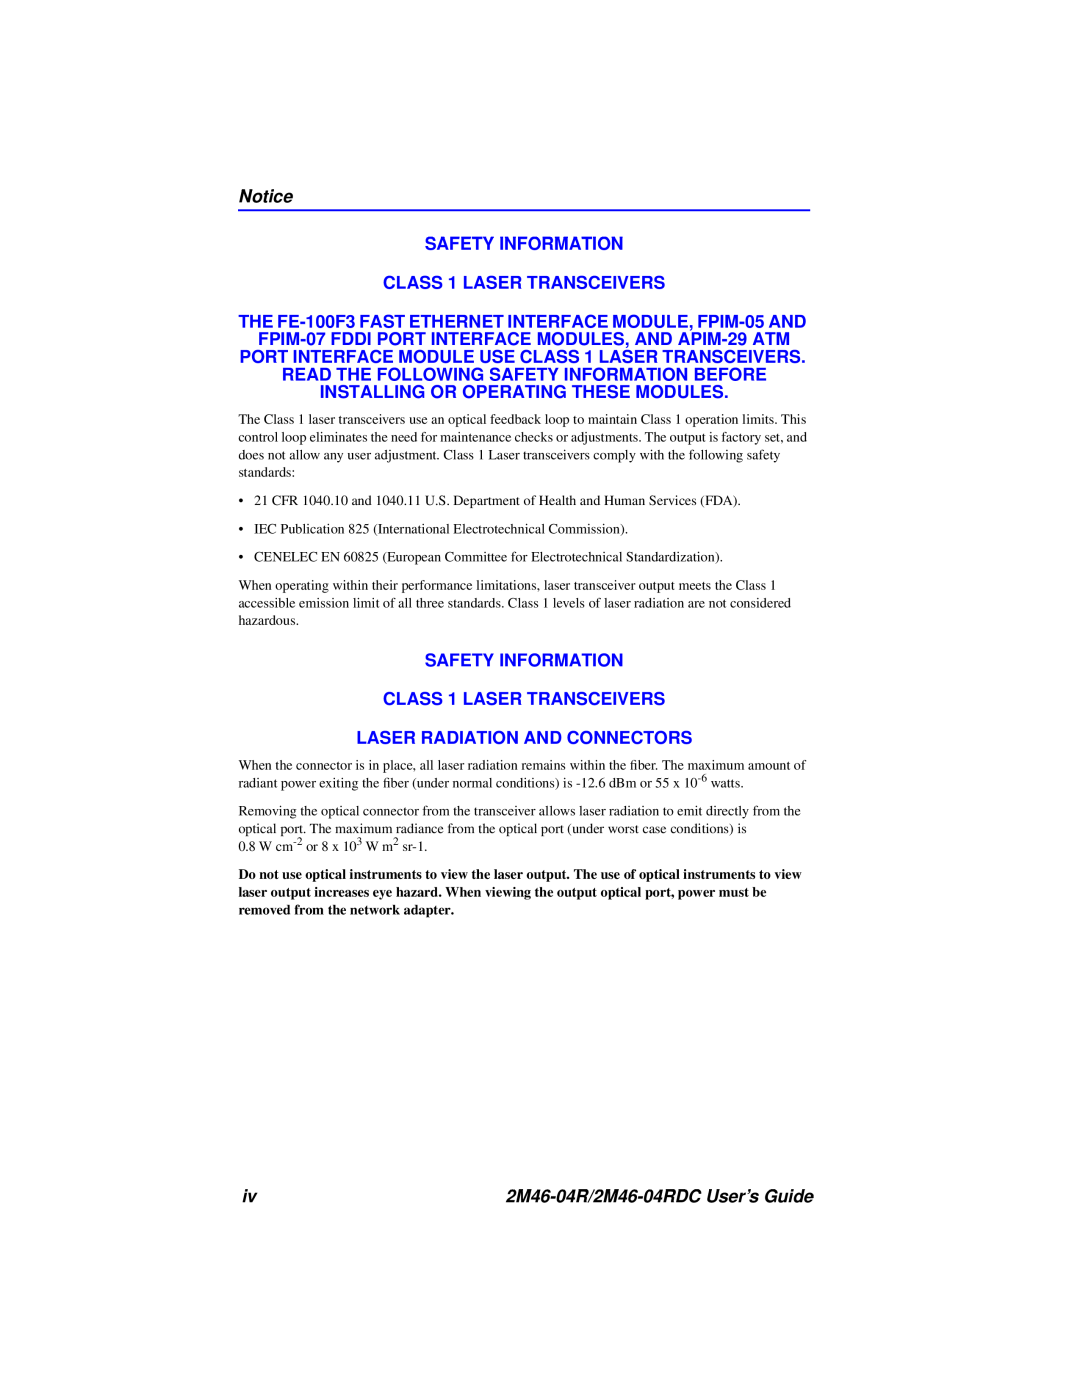 Cabletron Systems pmn manual SAFETY INFORMATION CLASS 1 LASER TRANSCEIVERS, Laser Radiation And Connectors 